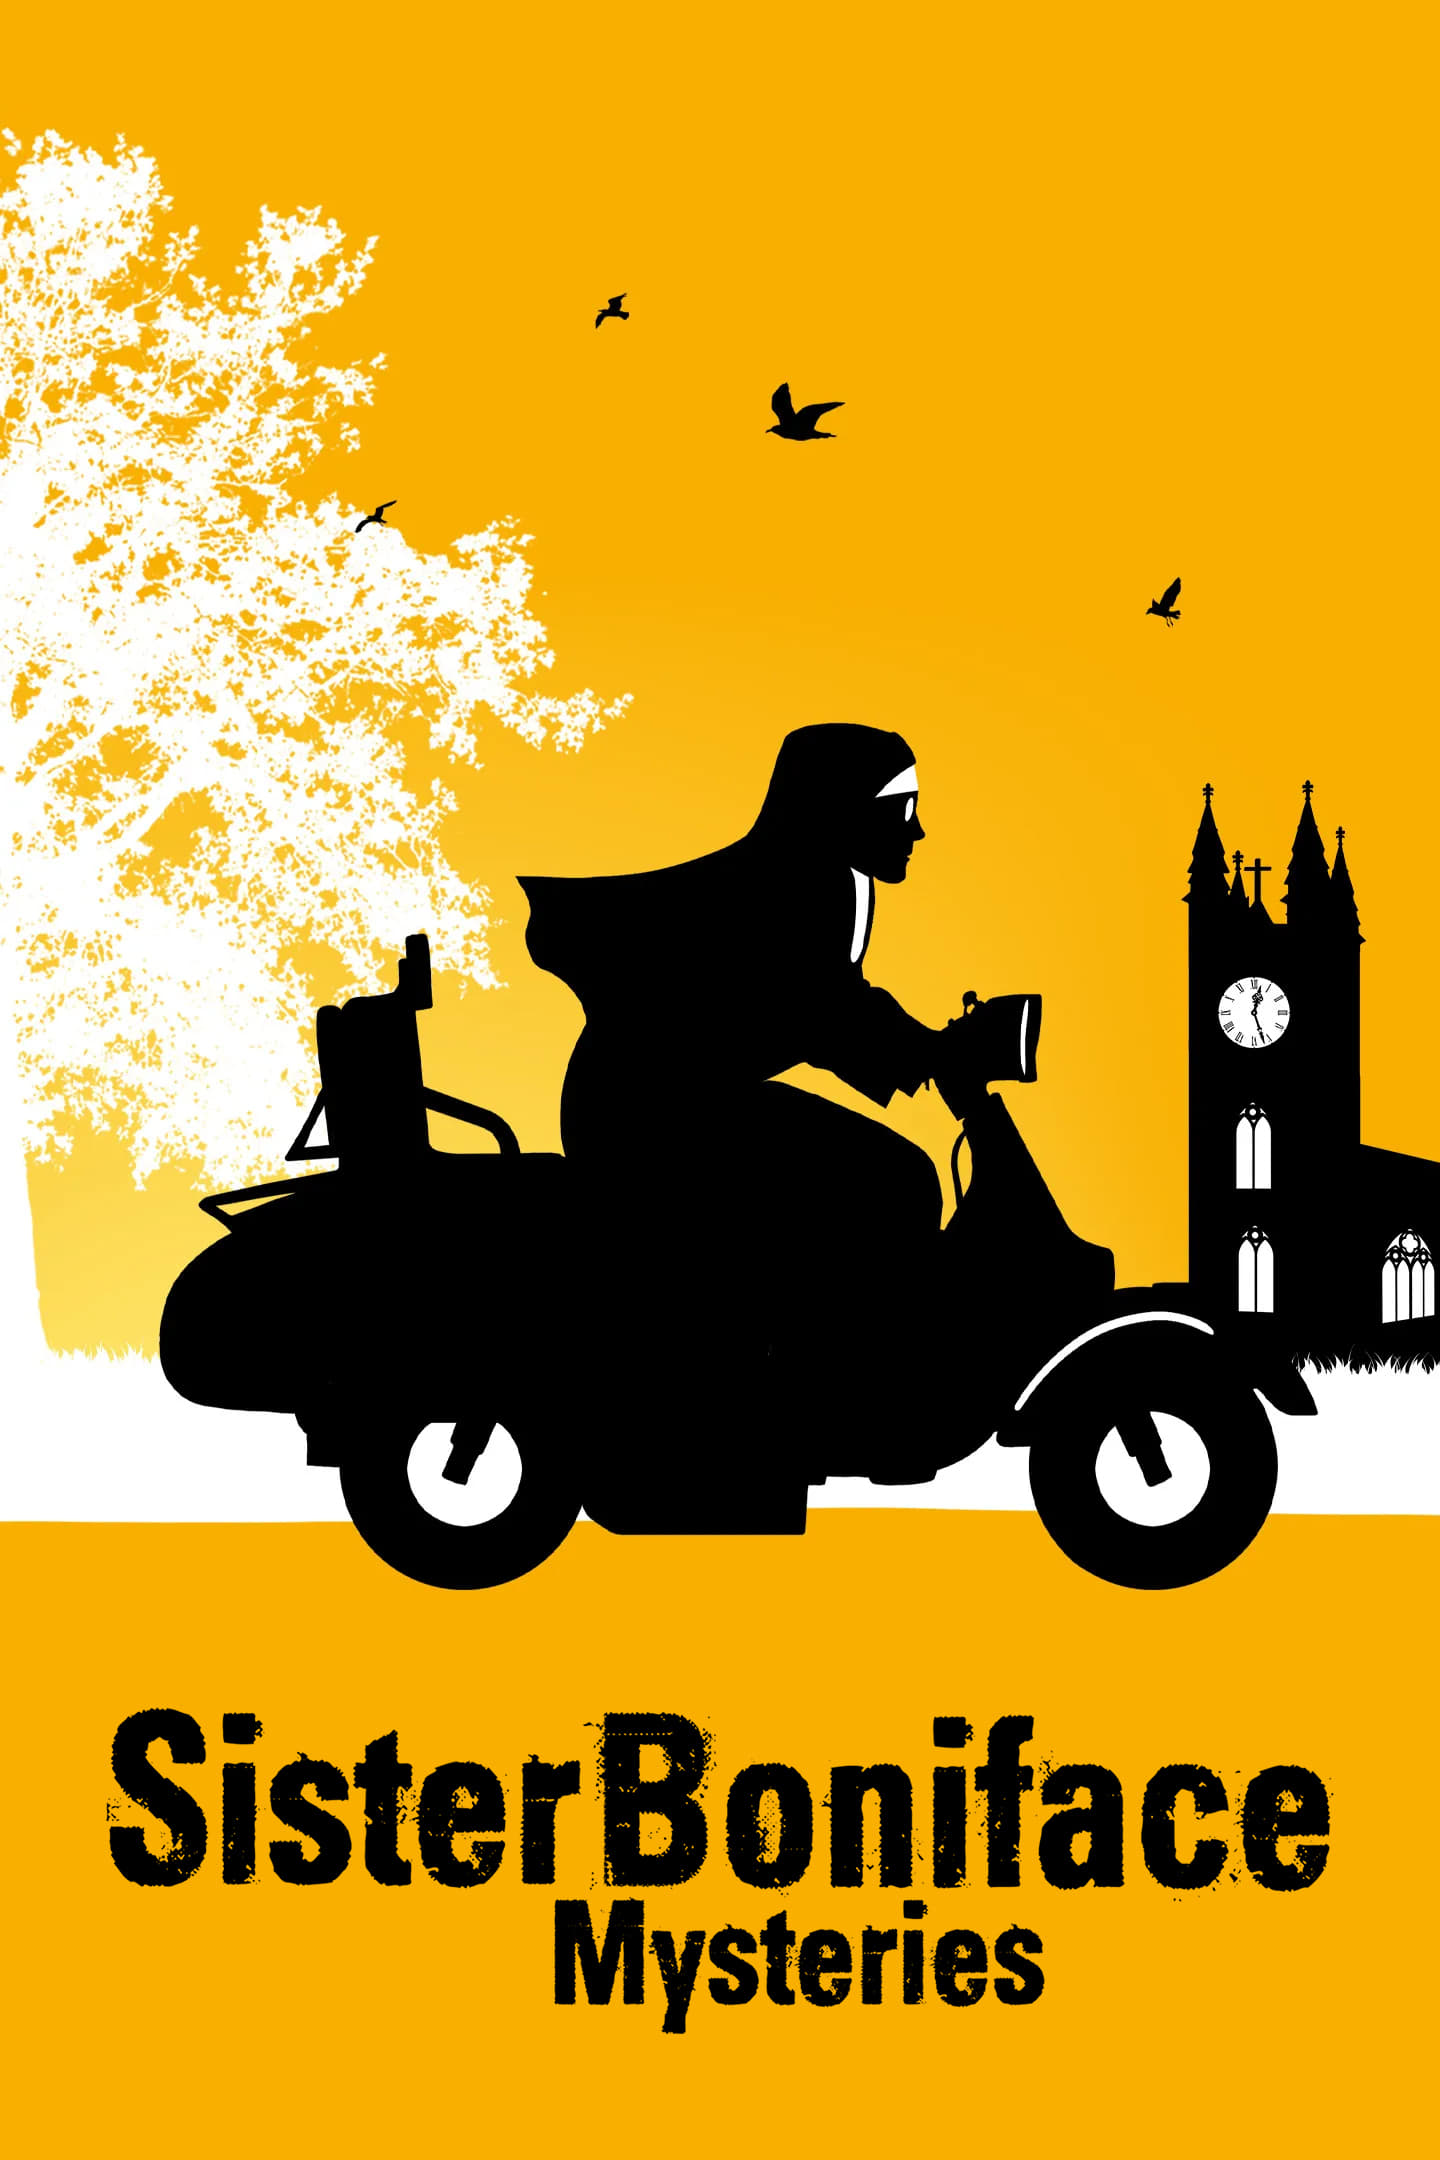 Sister Boniface Mysteries TV Shows About United Kingdom